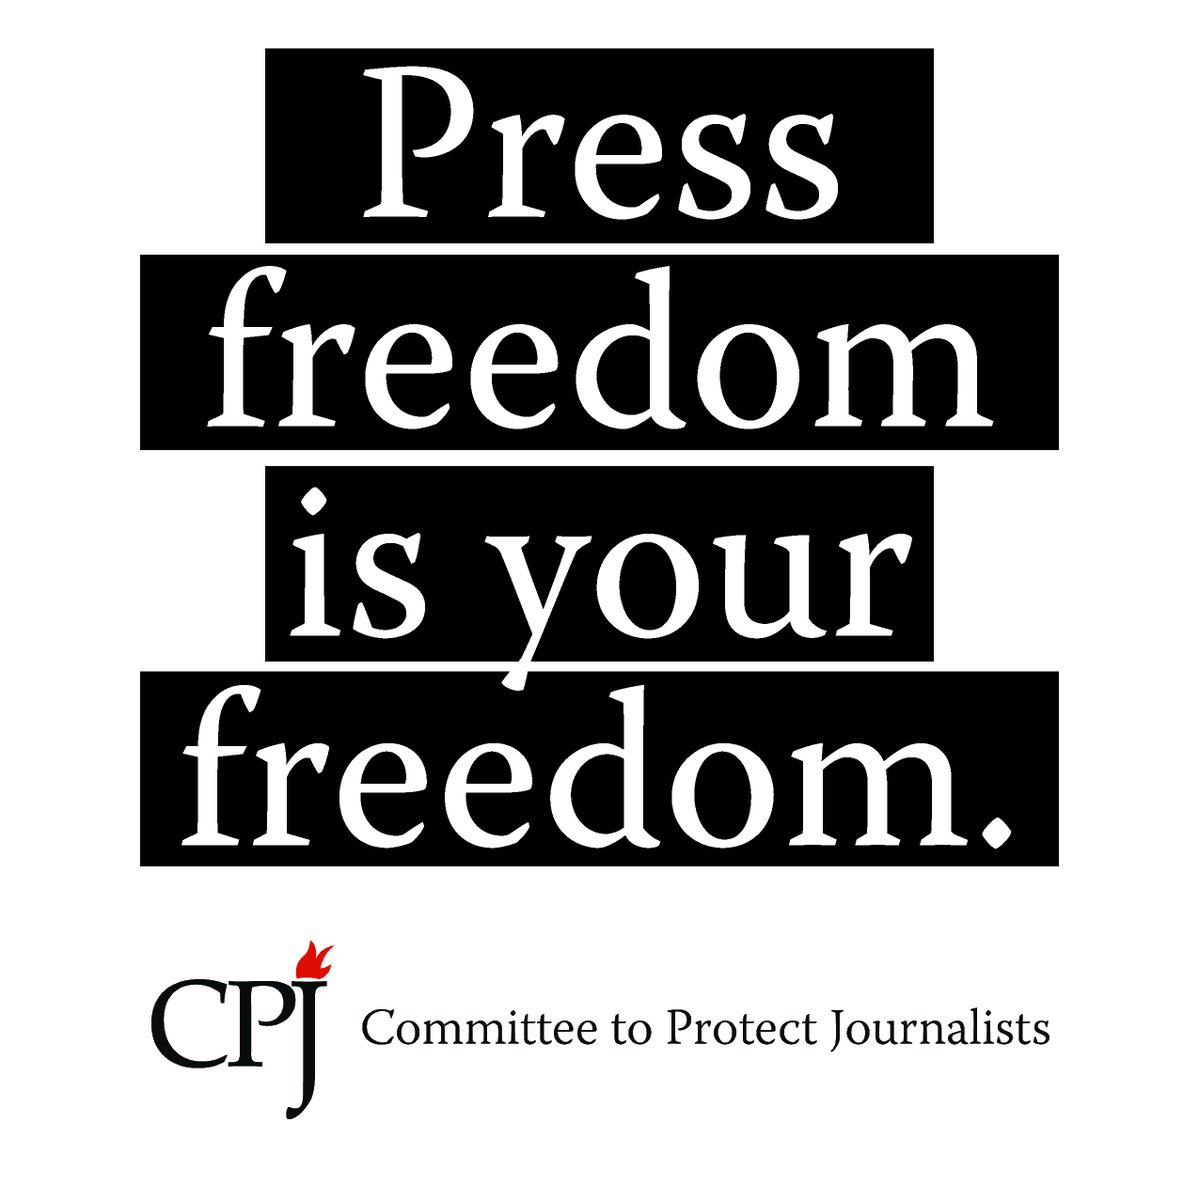 Every day, when we wake up, we seek information. From weather & traffic reports to news of political developments at home & abroad to whether our favorite sports team finally won, we turn to journalists for the information we need for our daily lives.

#PressFreedomIsYourFreedom.